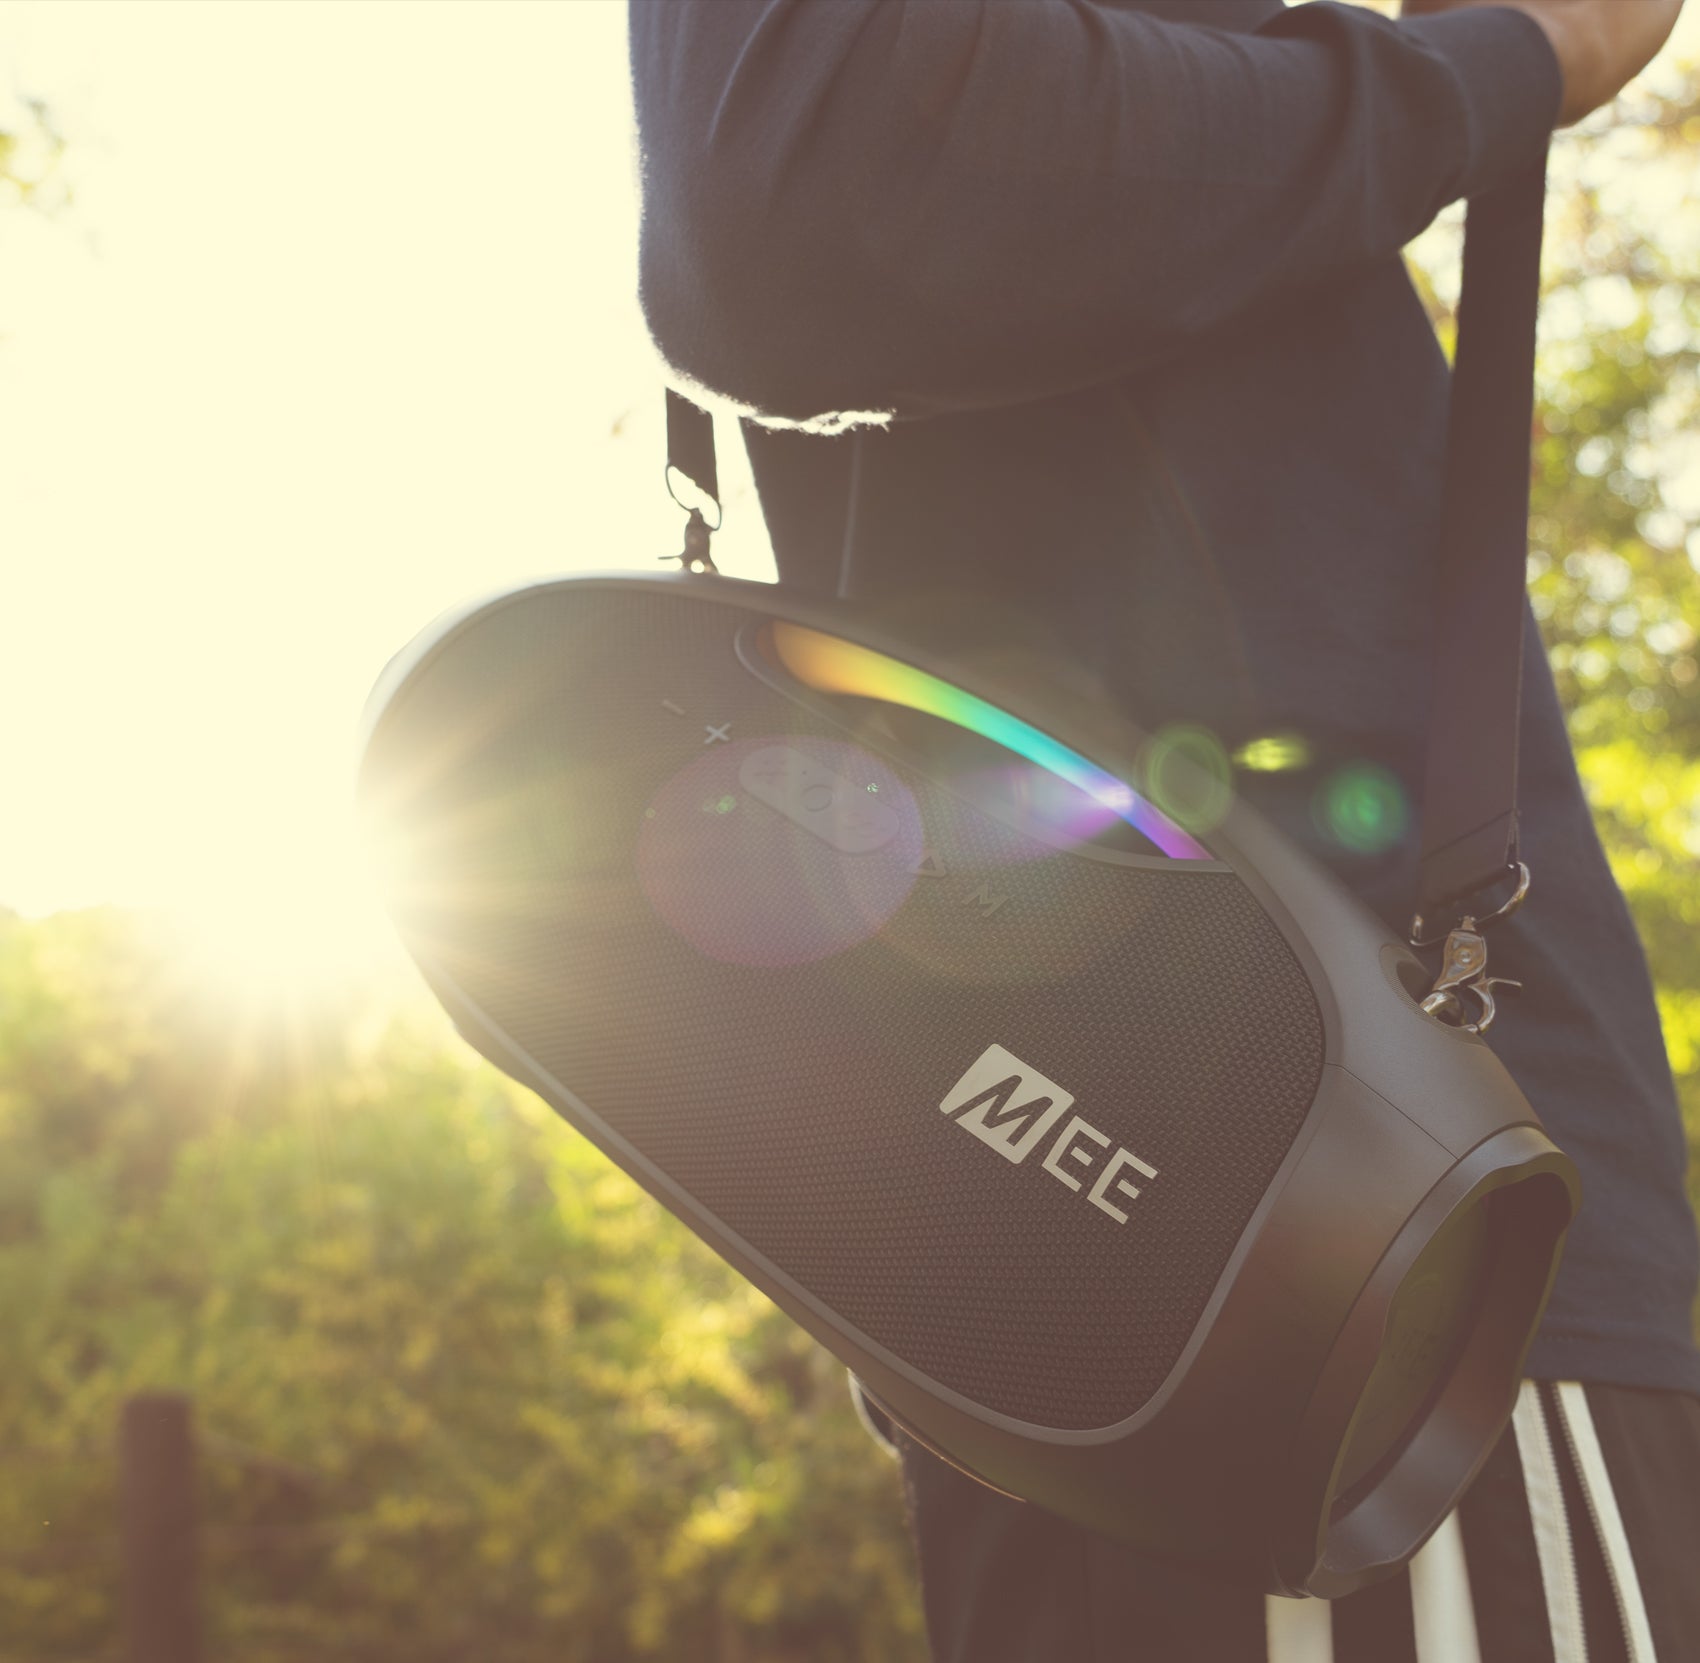 A person holding a portable meg speaker over their shoulder outdoors, with sunlight creating a lens flare.